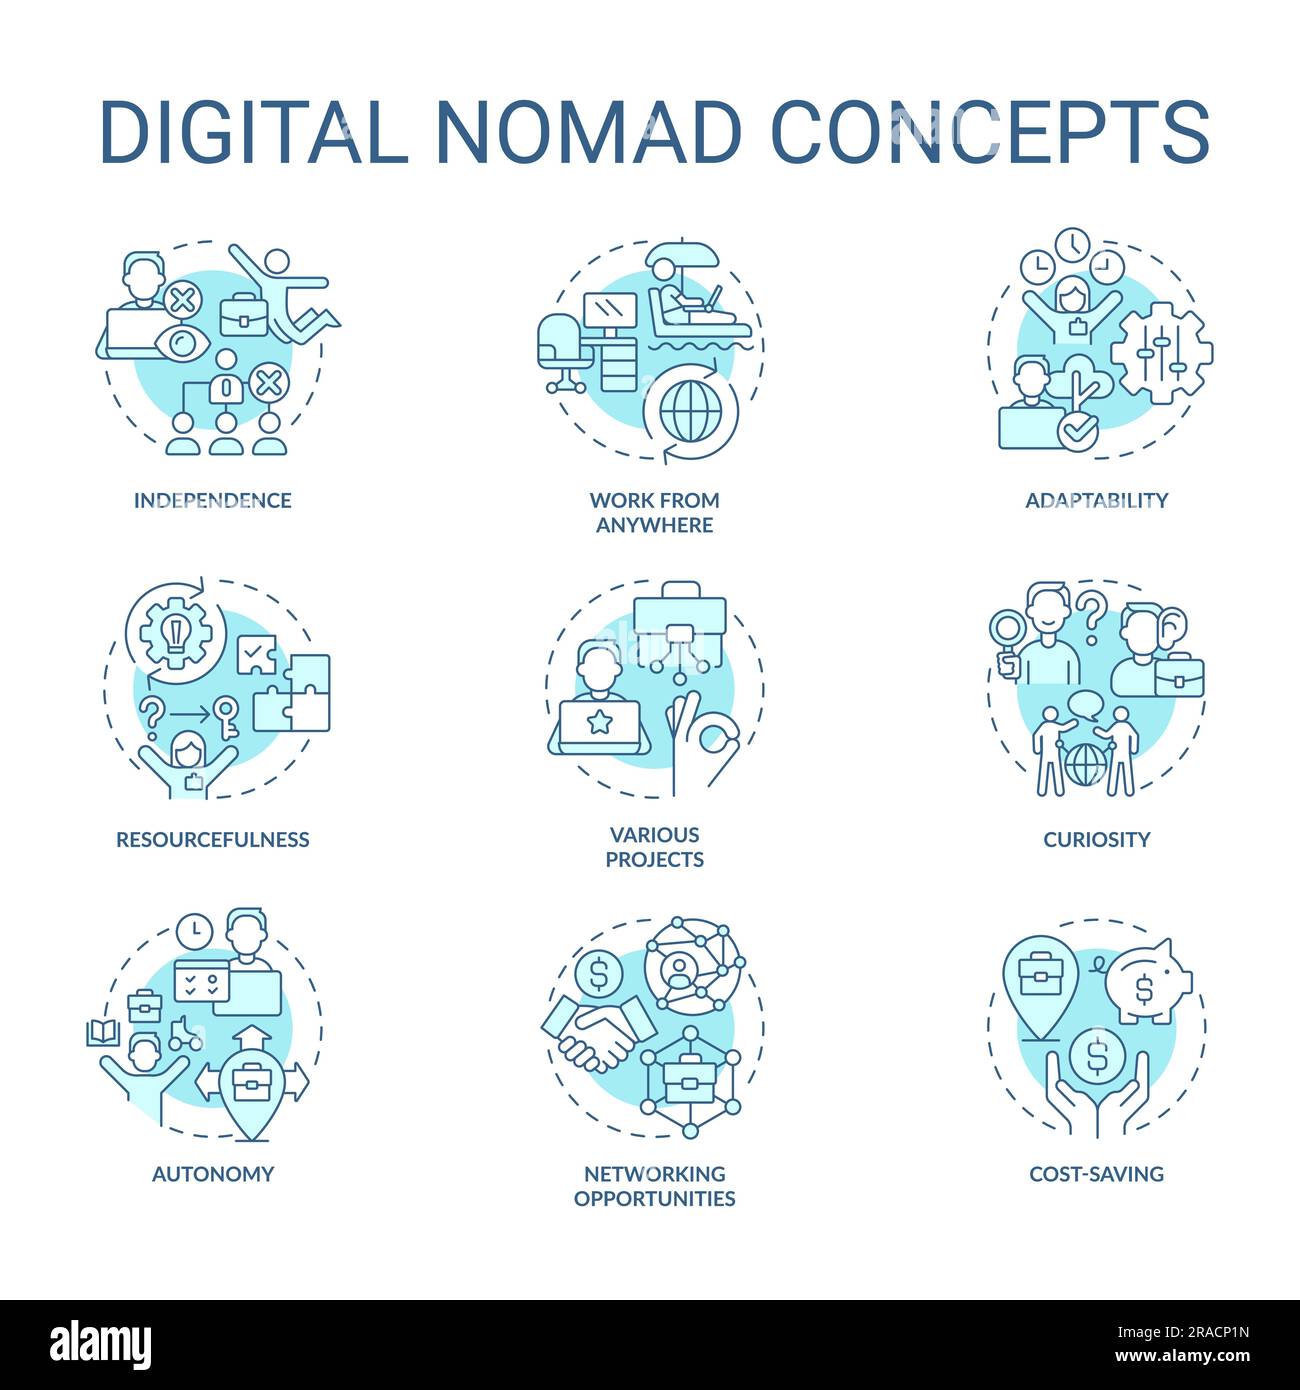 Digital nomad turquoise concept icons set Stock Vector